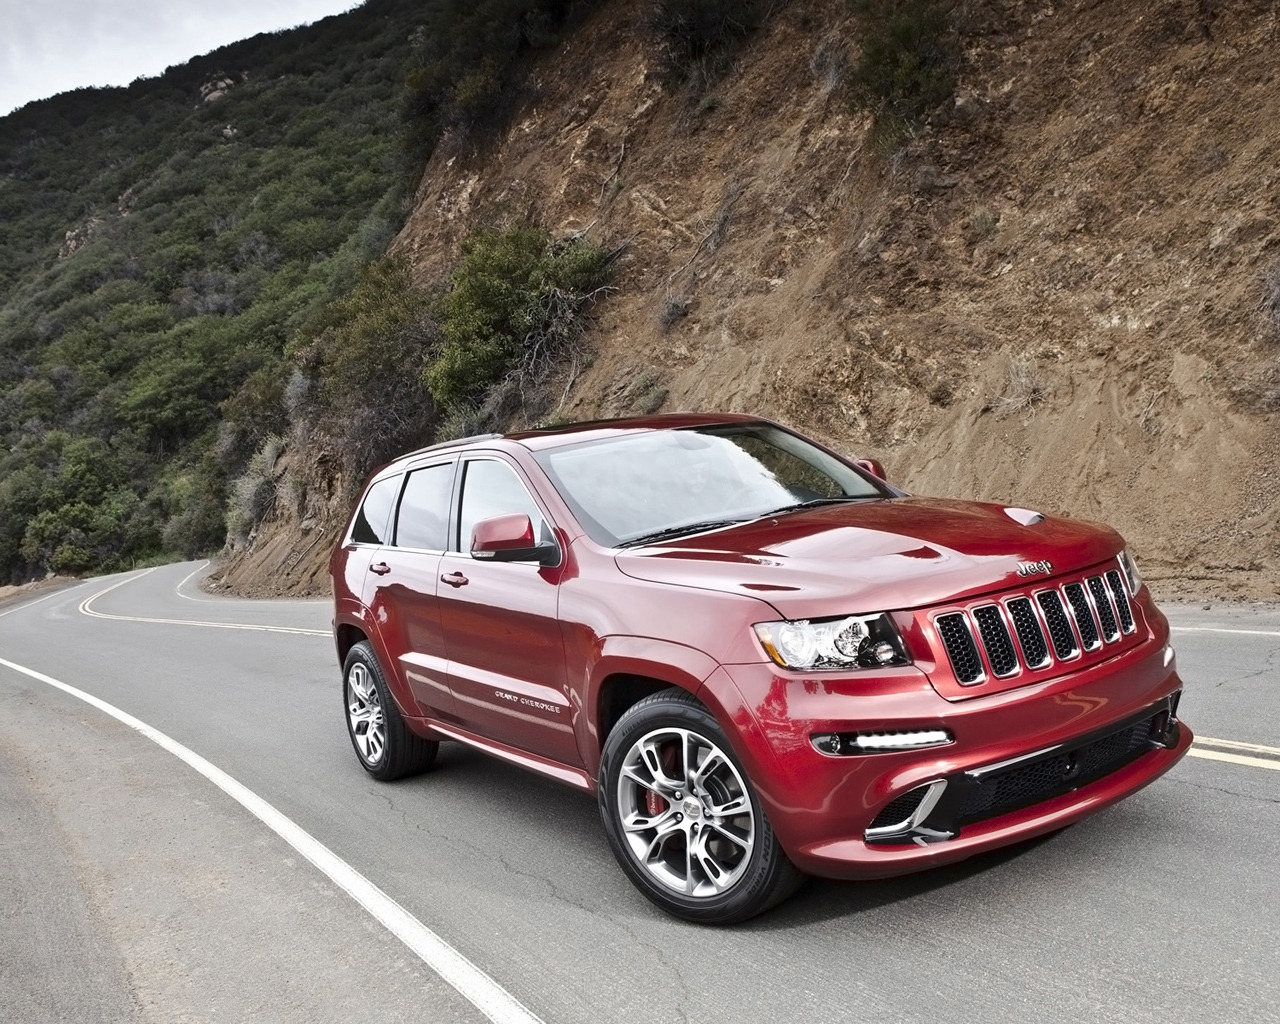 2012 Jeep Grand Cherokee SRT8 Speed for 1280 x 1024 resolution